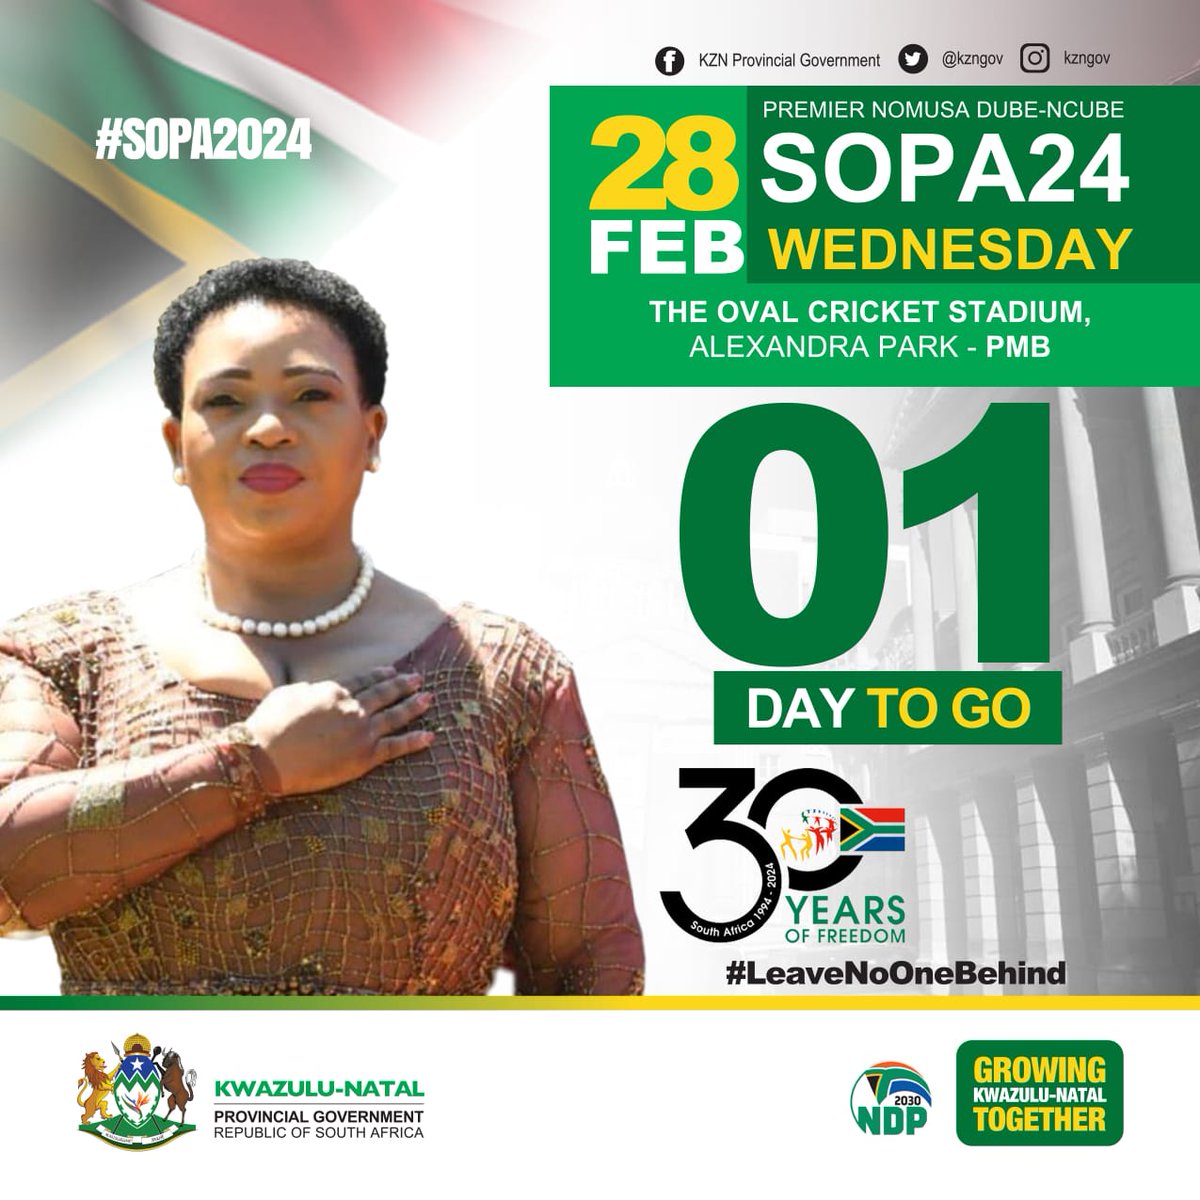 🚨 𝟭 𝗗𝗔𝗬 𝗧𝗢 𝗚𝗢!! 🚨

We’re just one day away from Premier Nomusa Dube-Ncube's State of the Province Address! Tomorrow, the Premier will unveil the Programme of Action for the Provincial Government, highlighting key priorities for KwaZulu-Natal. 
#KZNSOPA2024